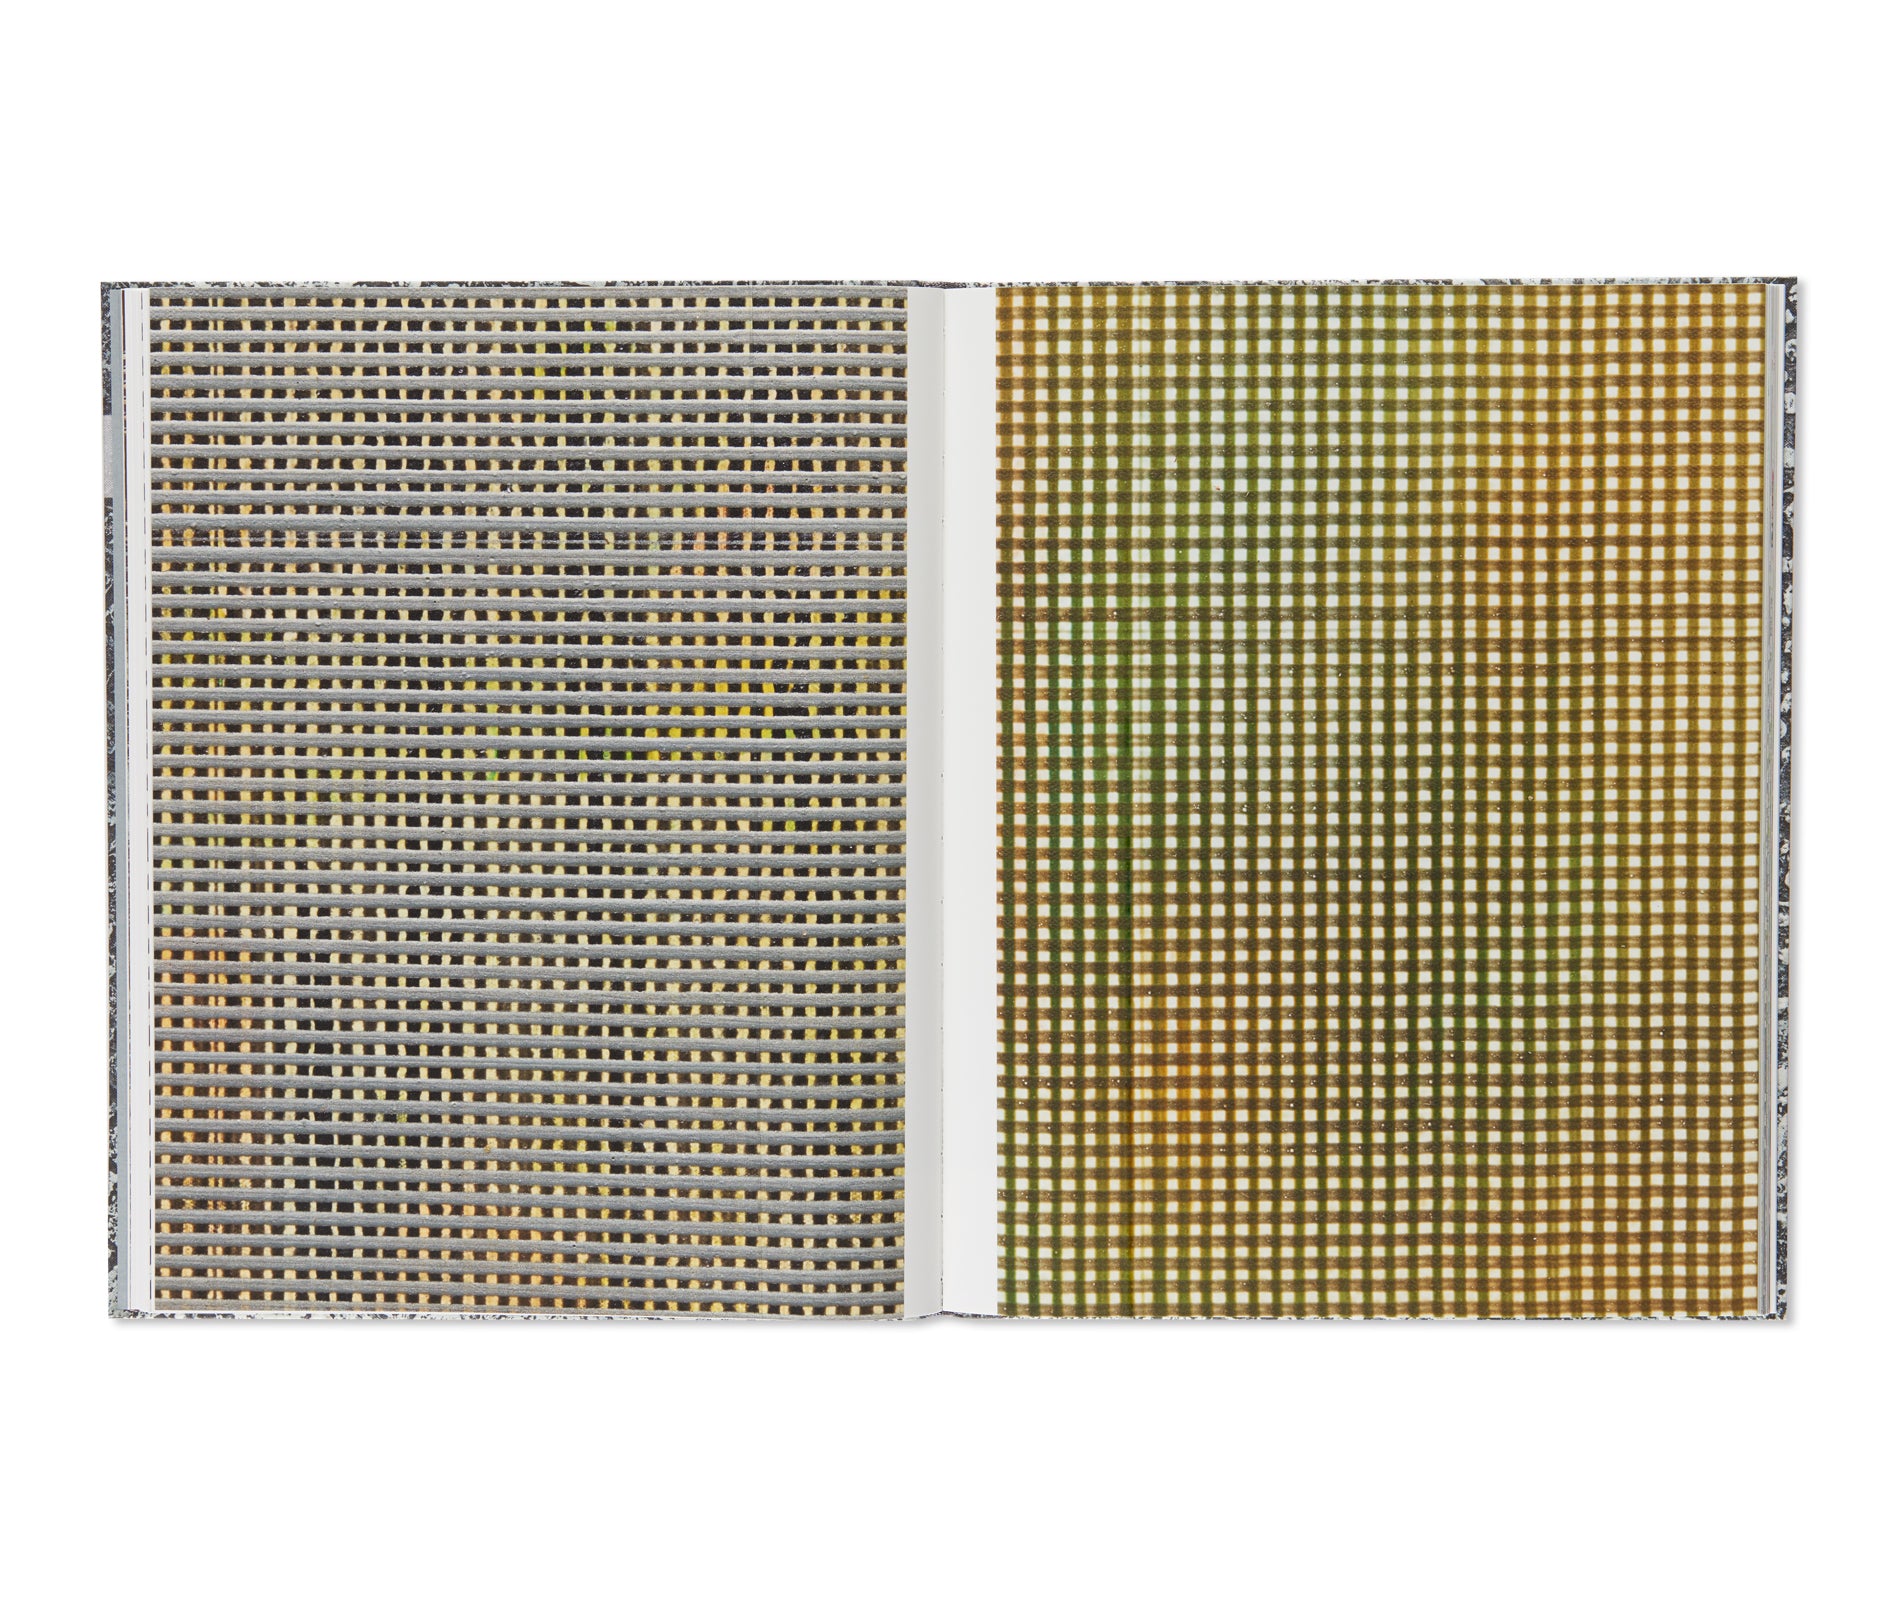 MORE DIMENSIONS THAN YOU KNOW: JACK WHITTEN, 1979–1989 by Jack Whitten